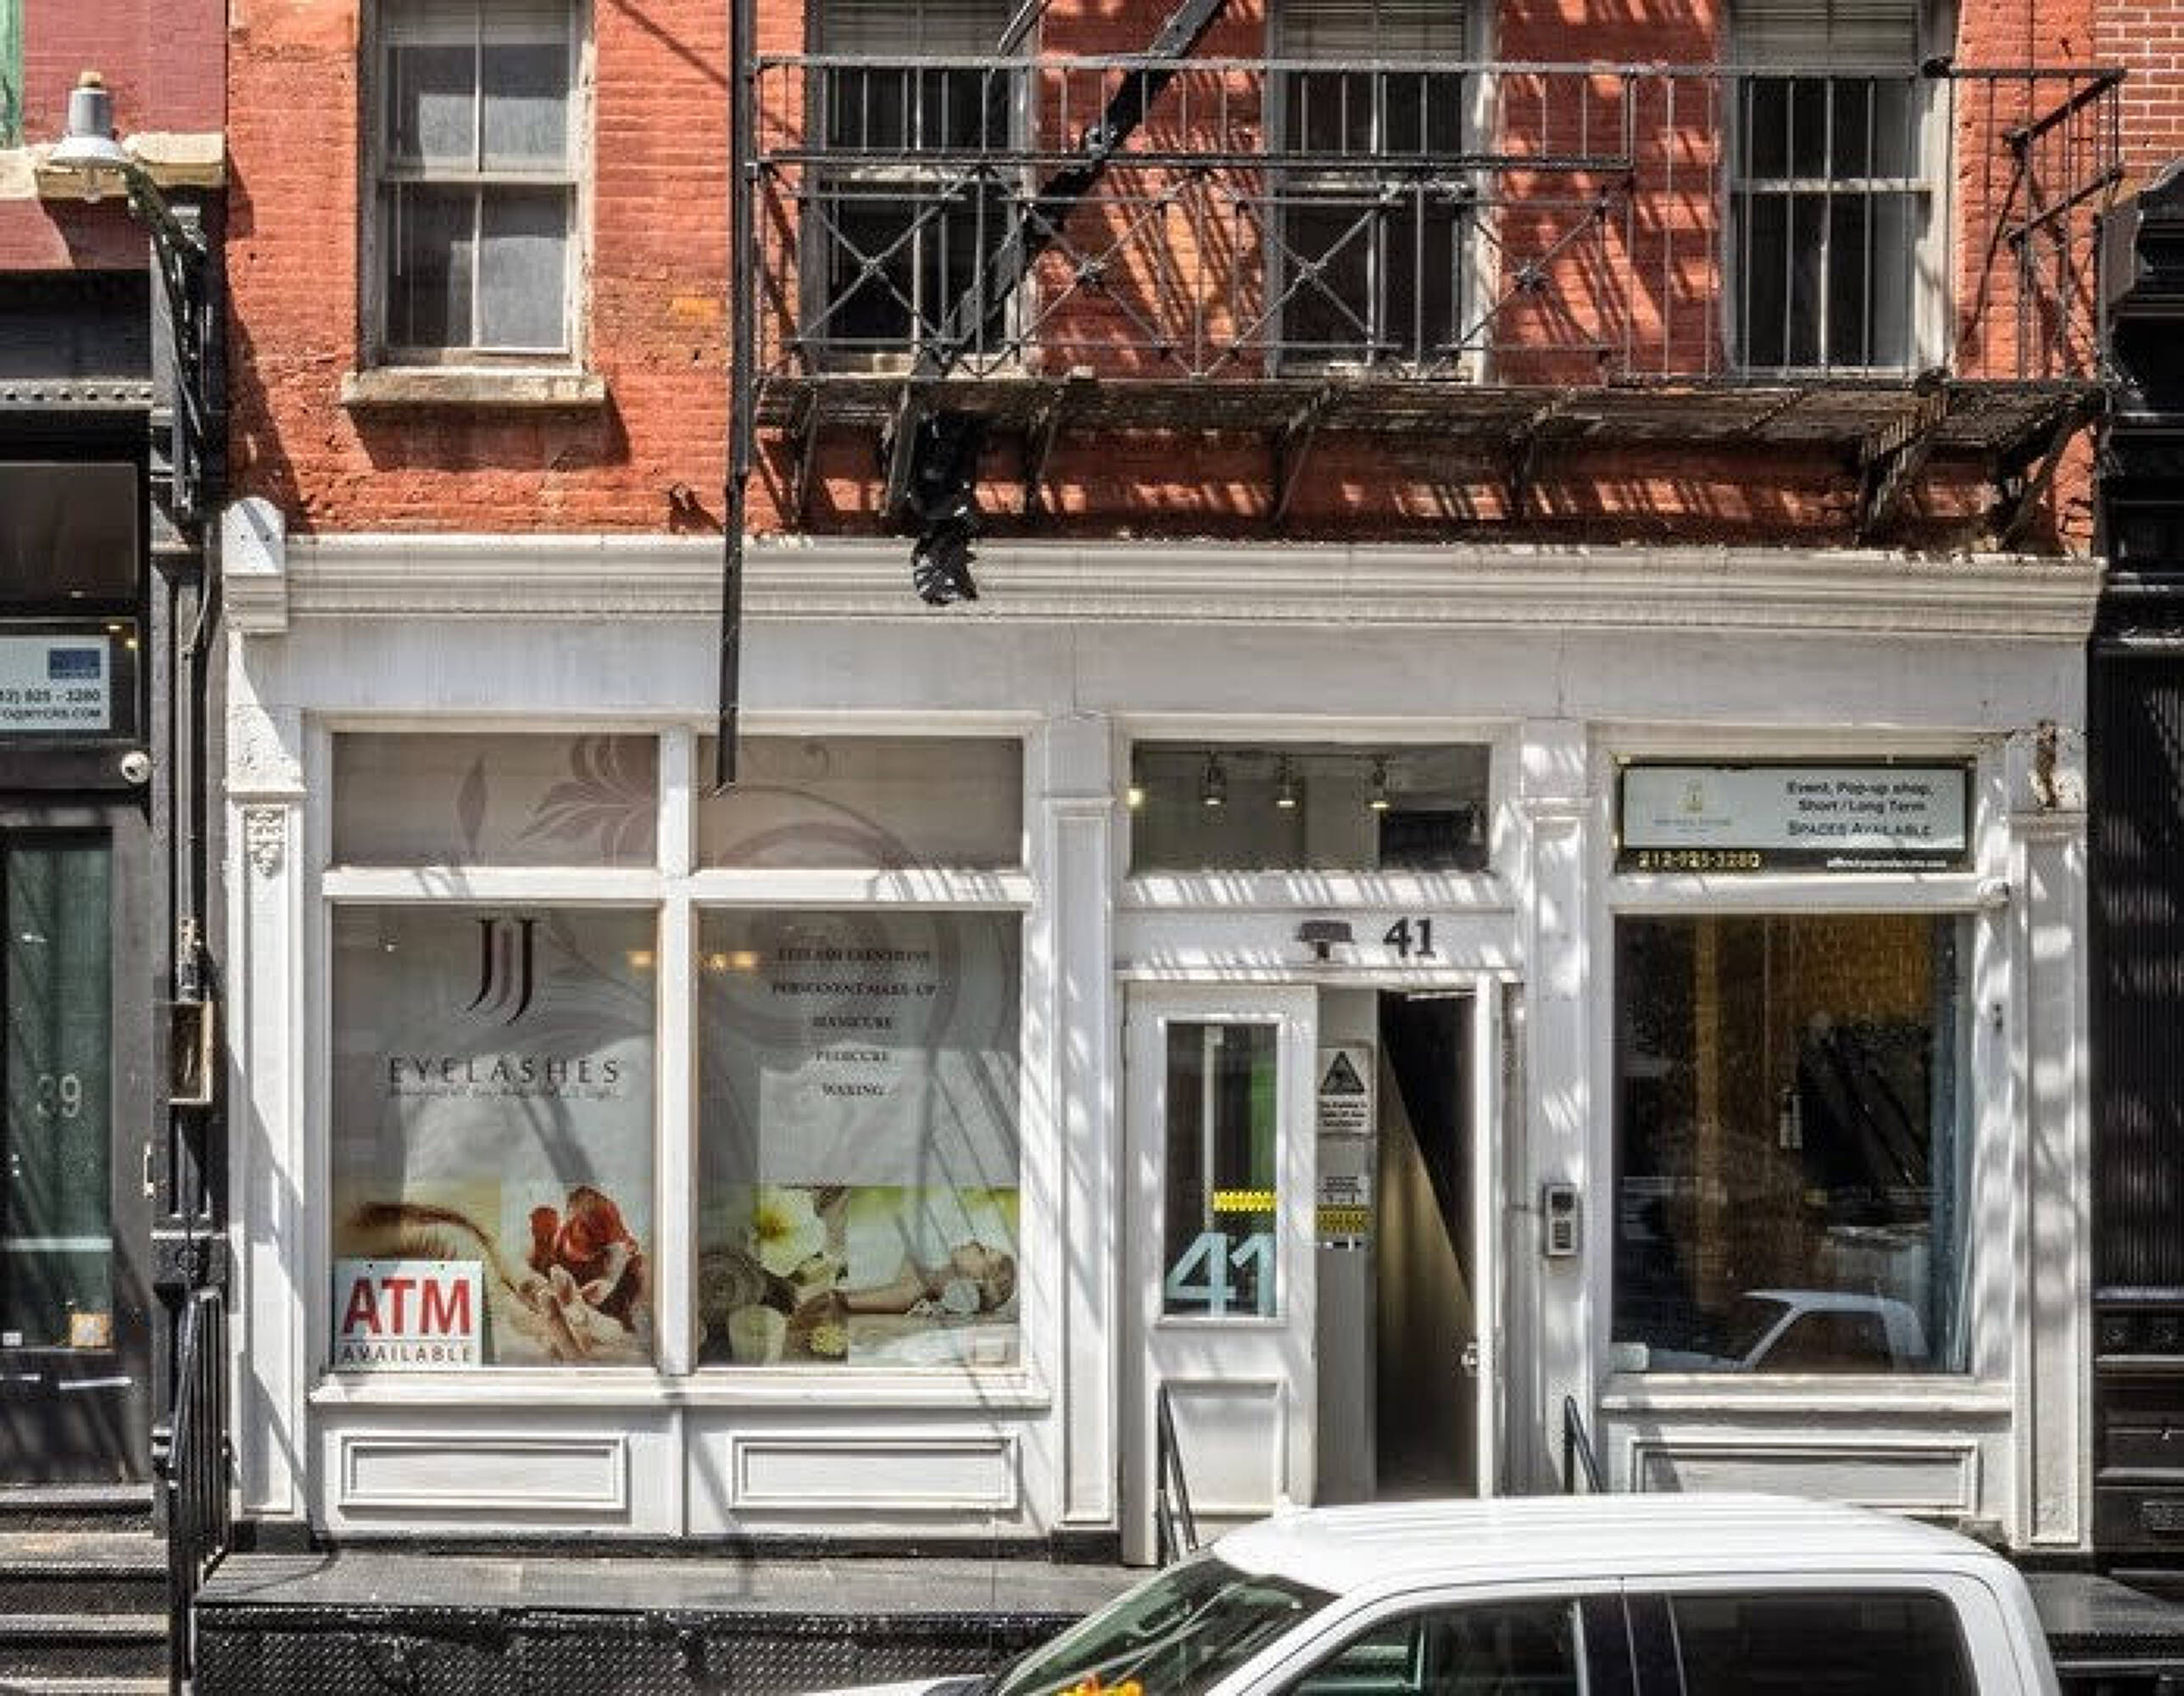 Gucci's SoHo, New York Store on Wooster Street